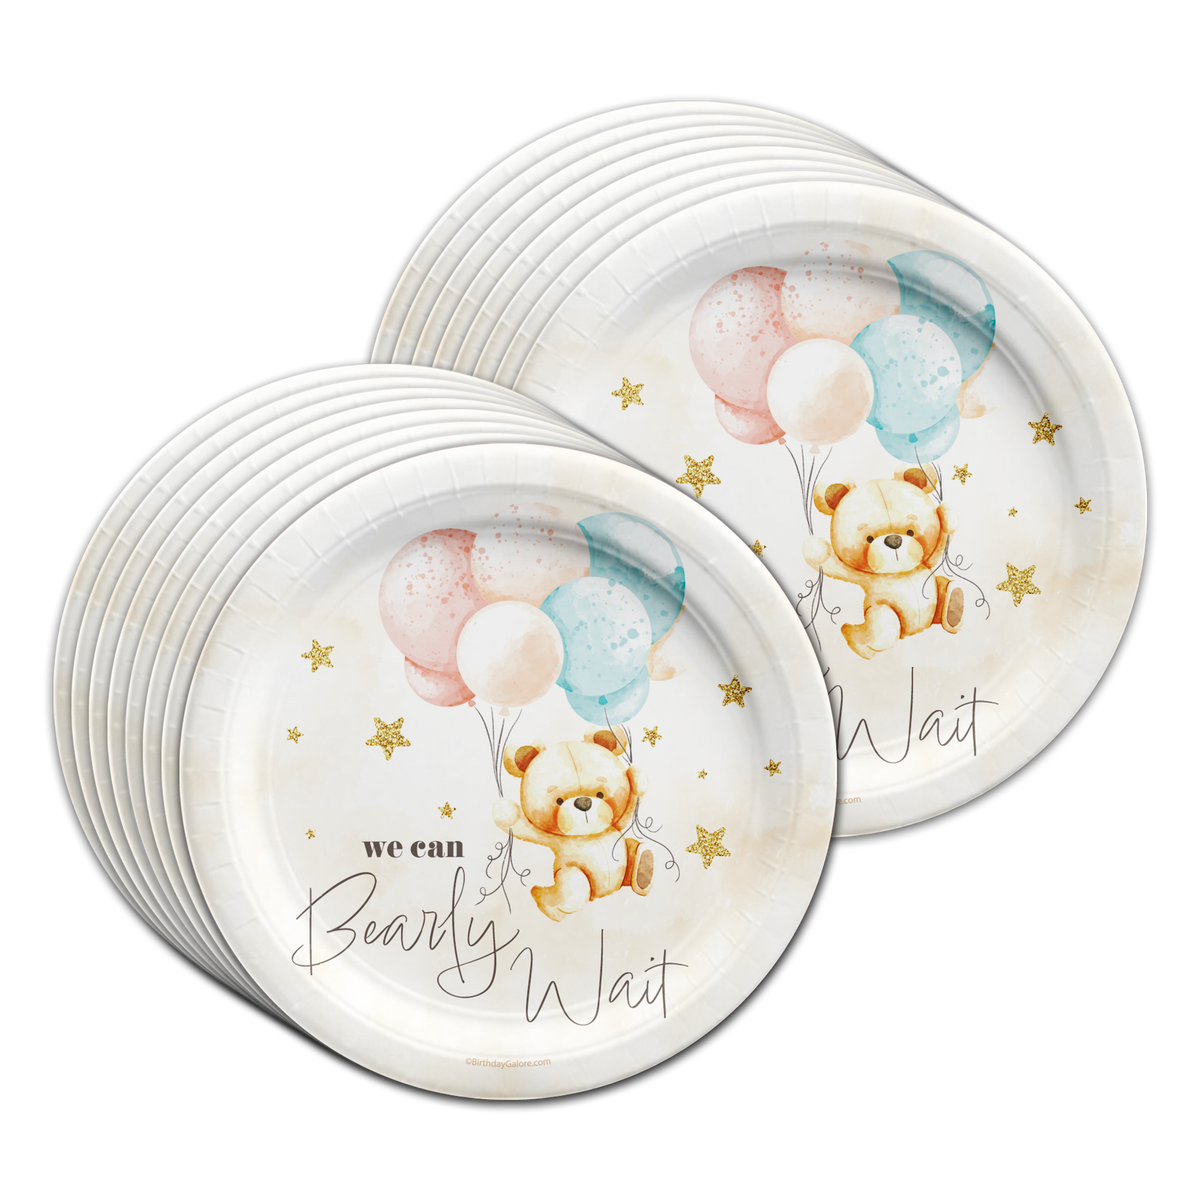 Teddy Bear Birthday Party Tableware Kit For 16 Guests